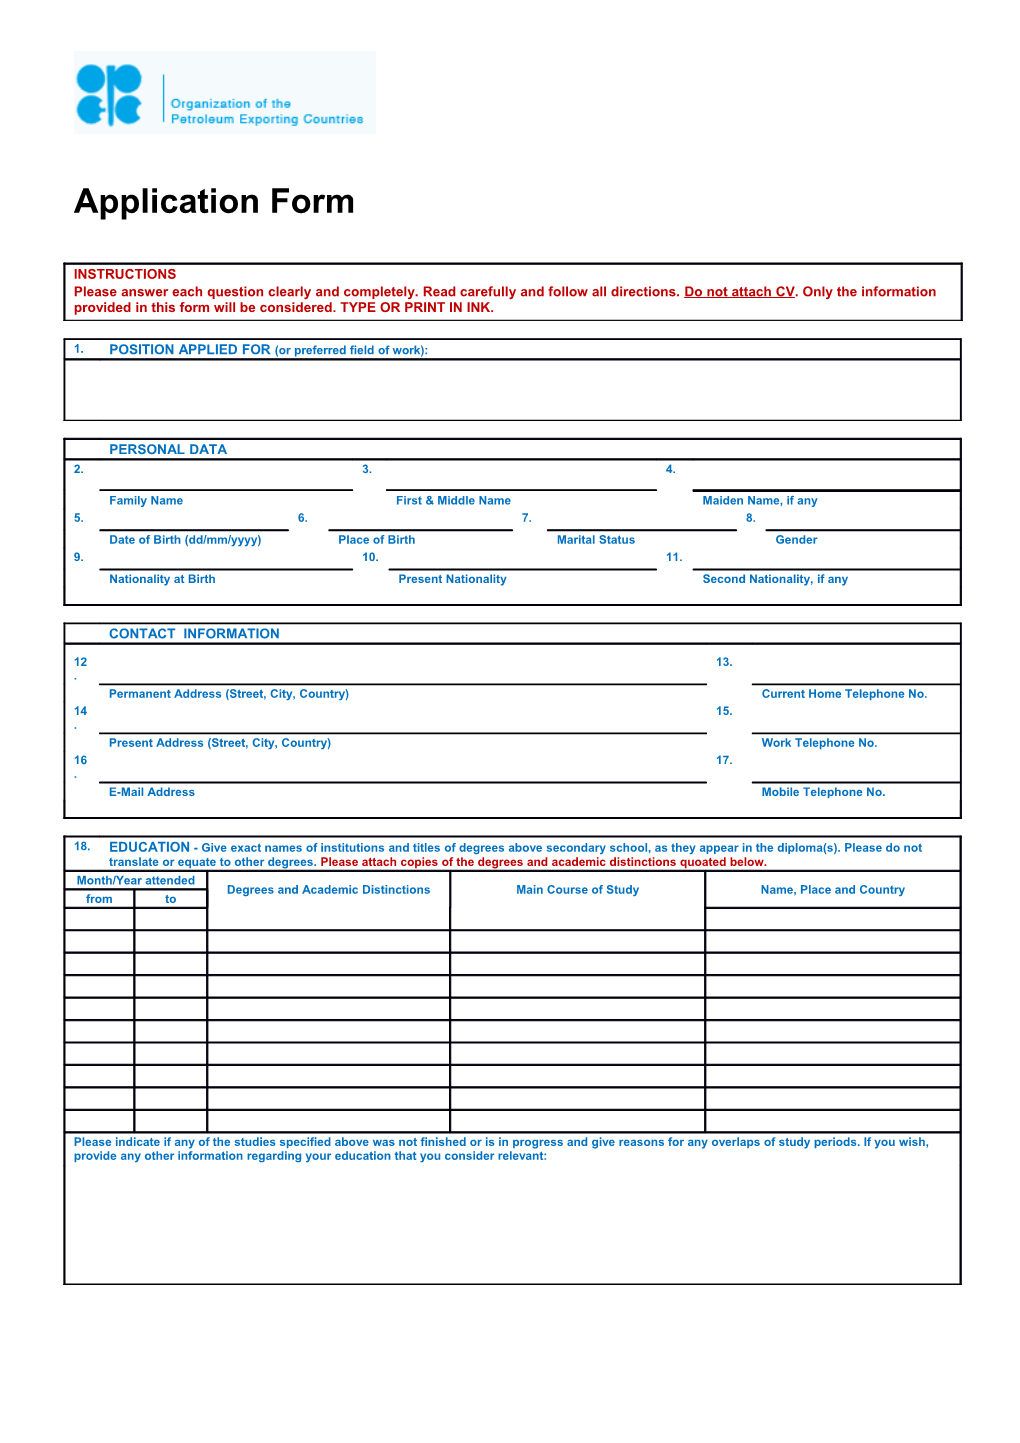 OPEC Personal History Form